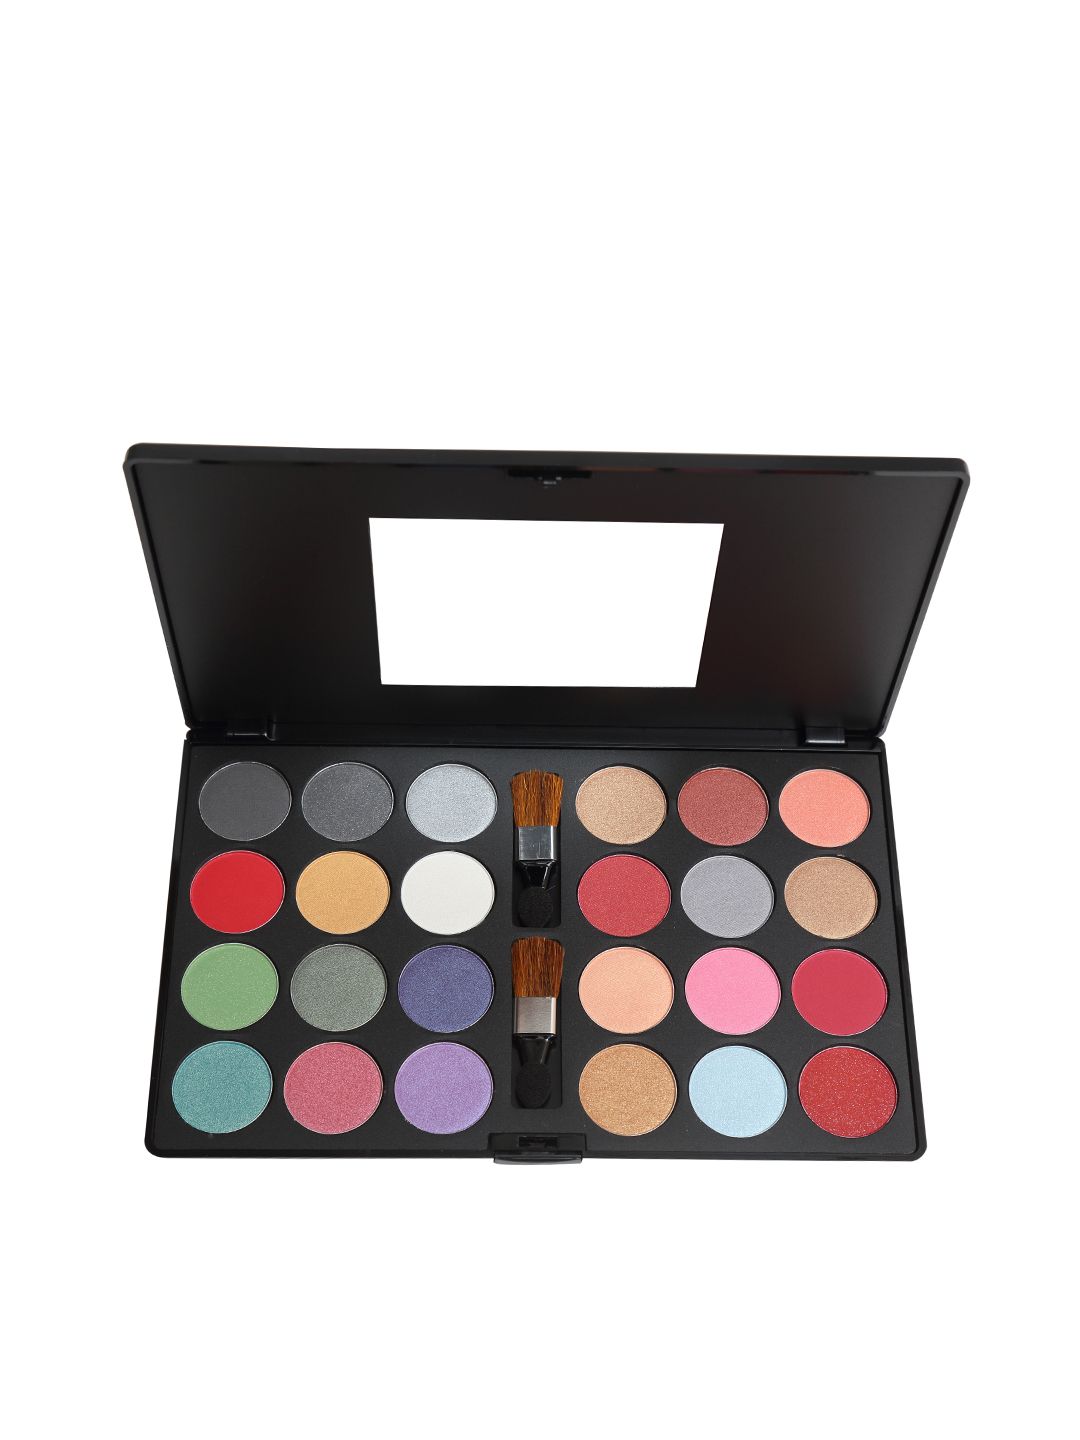 Miss Claire 3 Professional Eyeshadow Palette 48 g Price in India